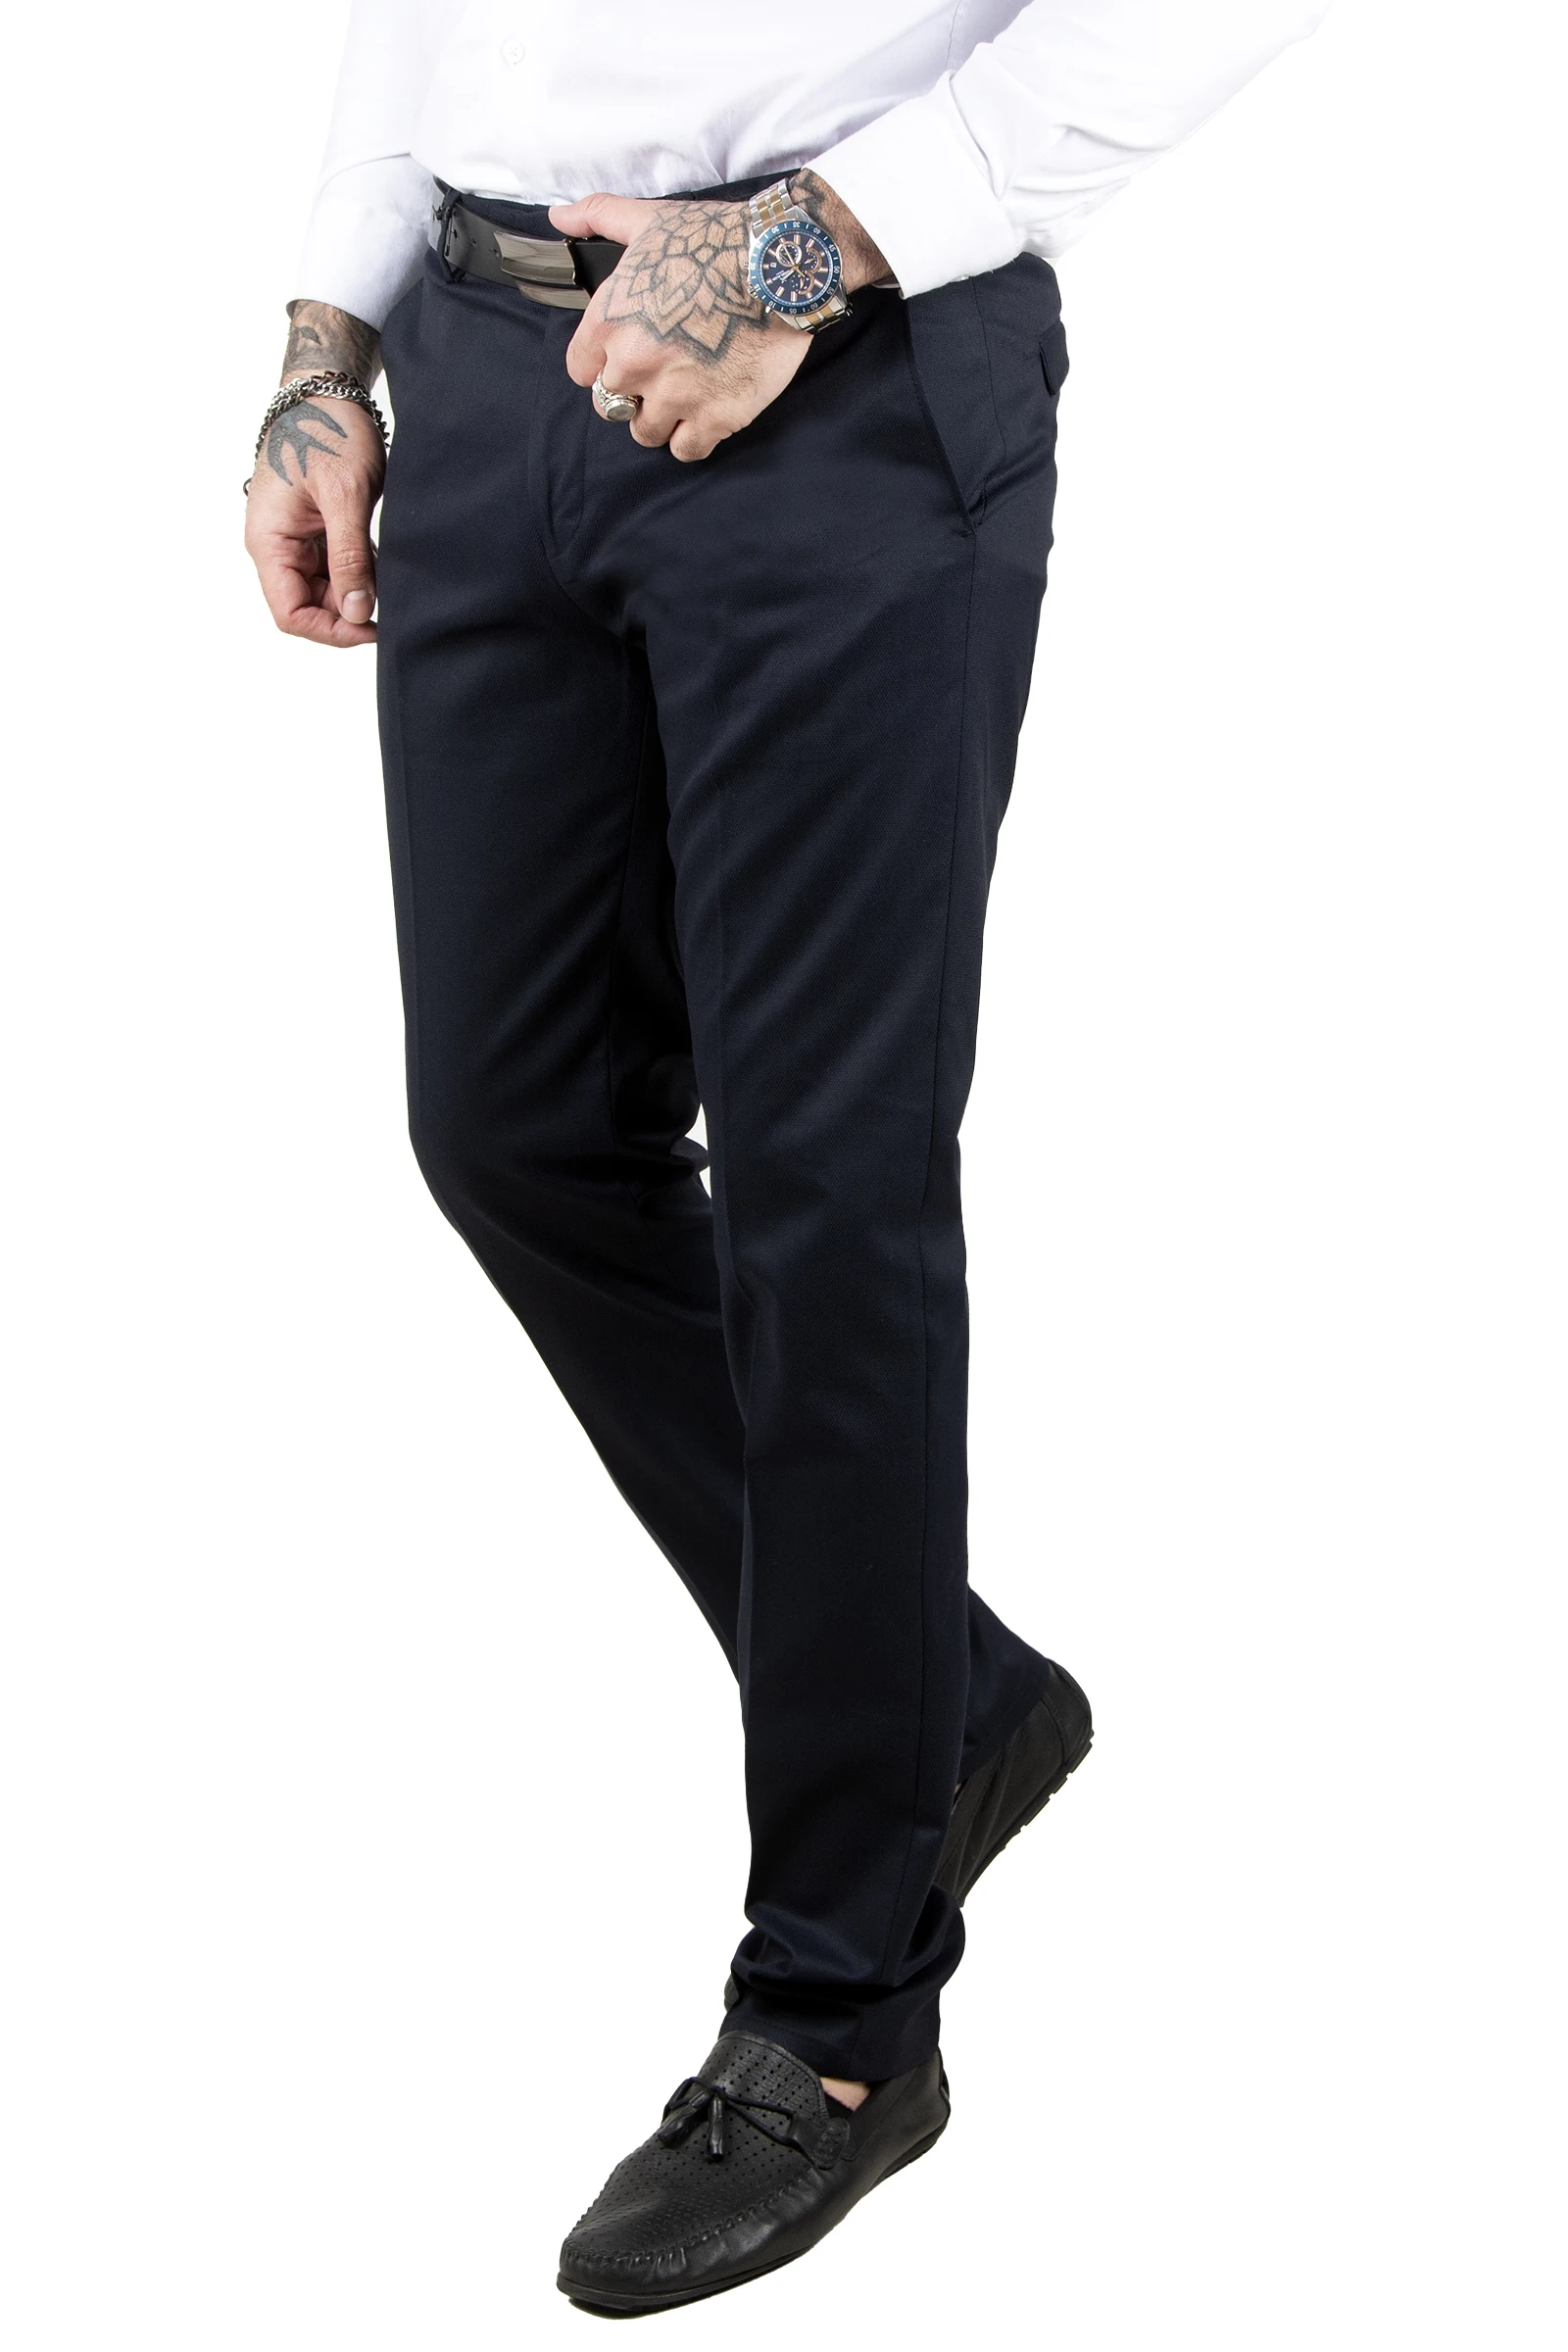 

DeepSEA Patterned Pettitoes Straight Slim Fit Back Pocket With Lid Male Cloth Trousers 2304496